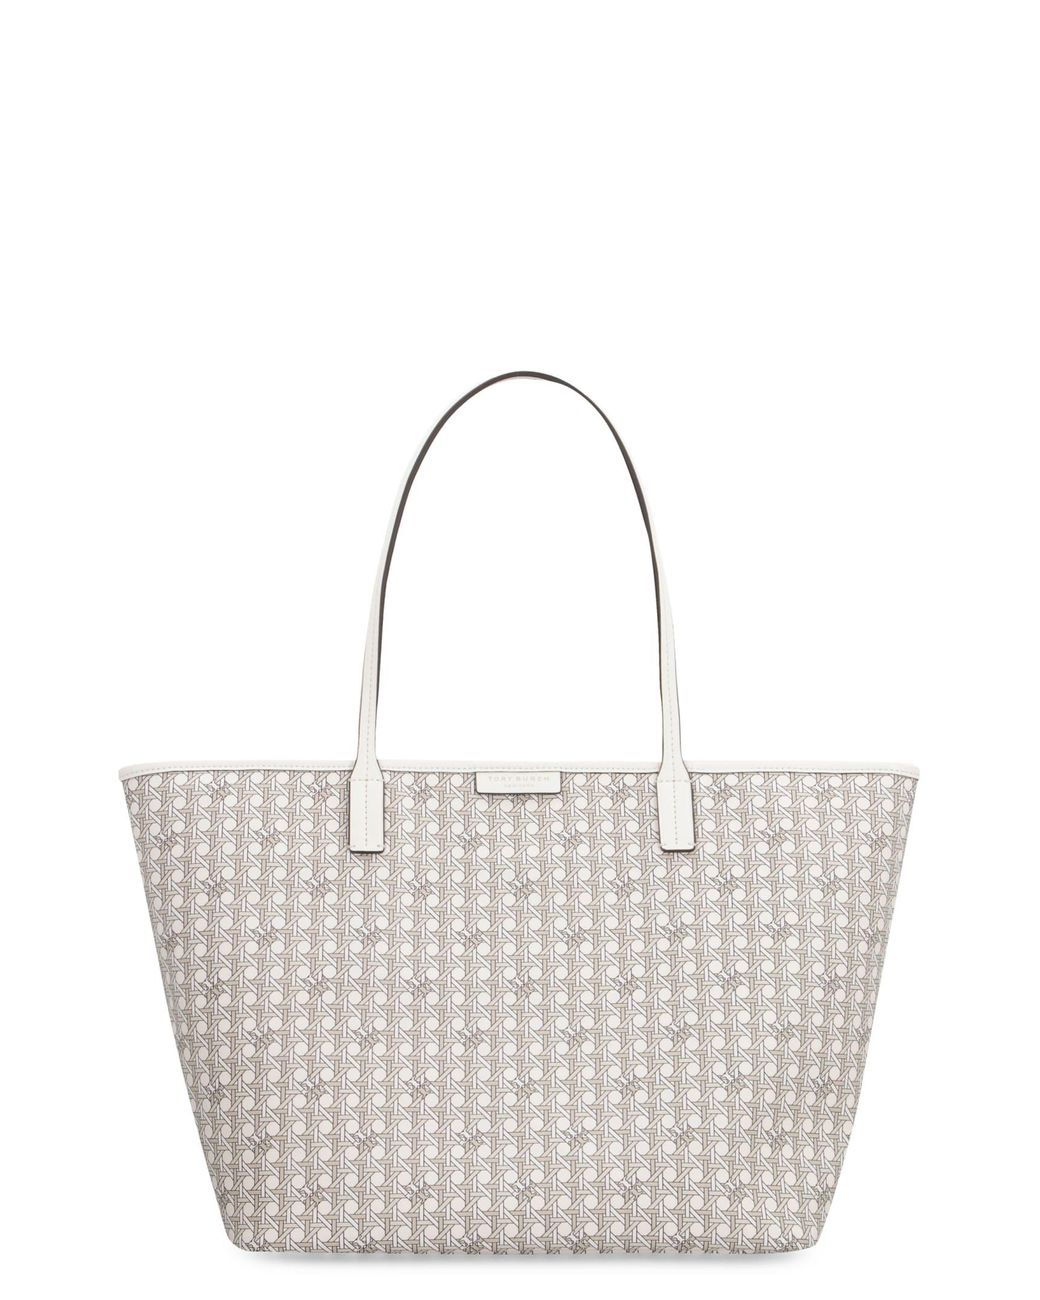 Tory Burch Ever-ready Tote Bag in Blue | Lyst